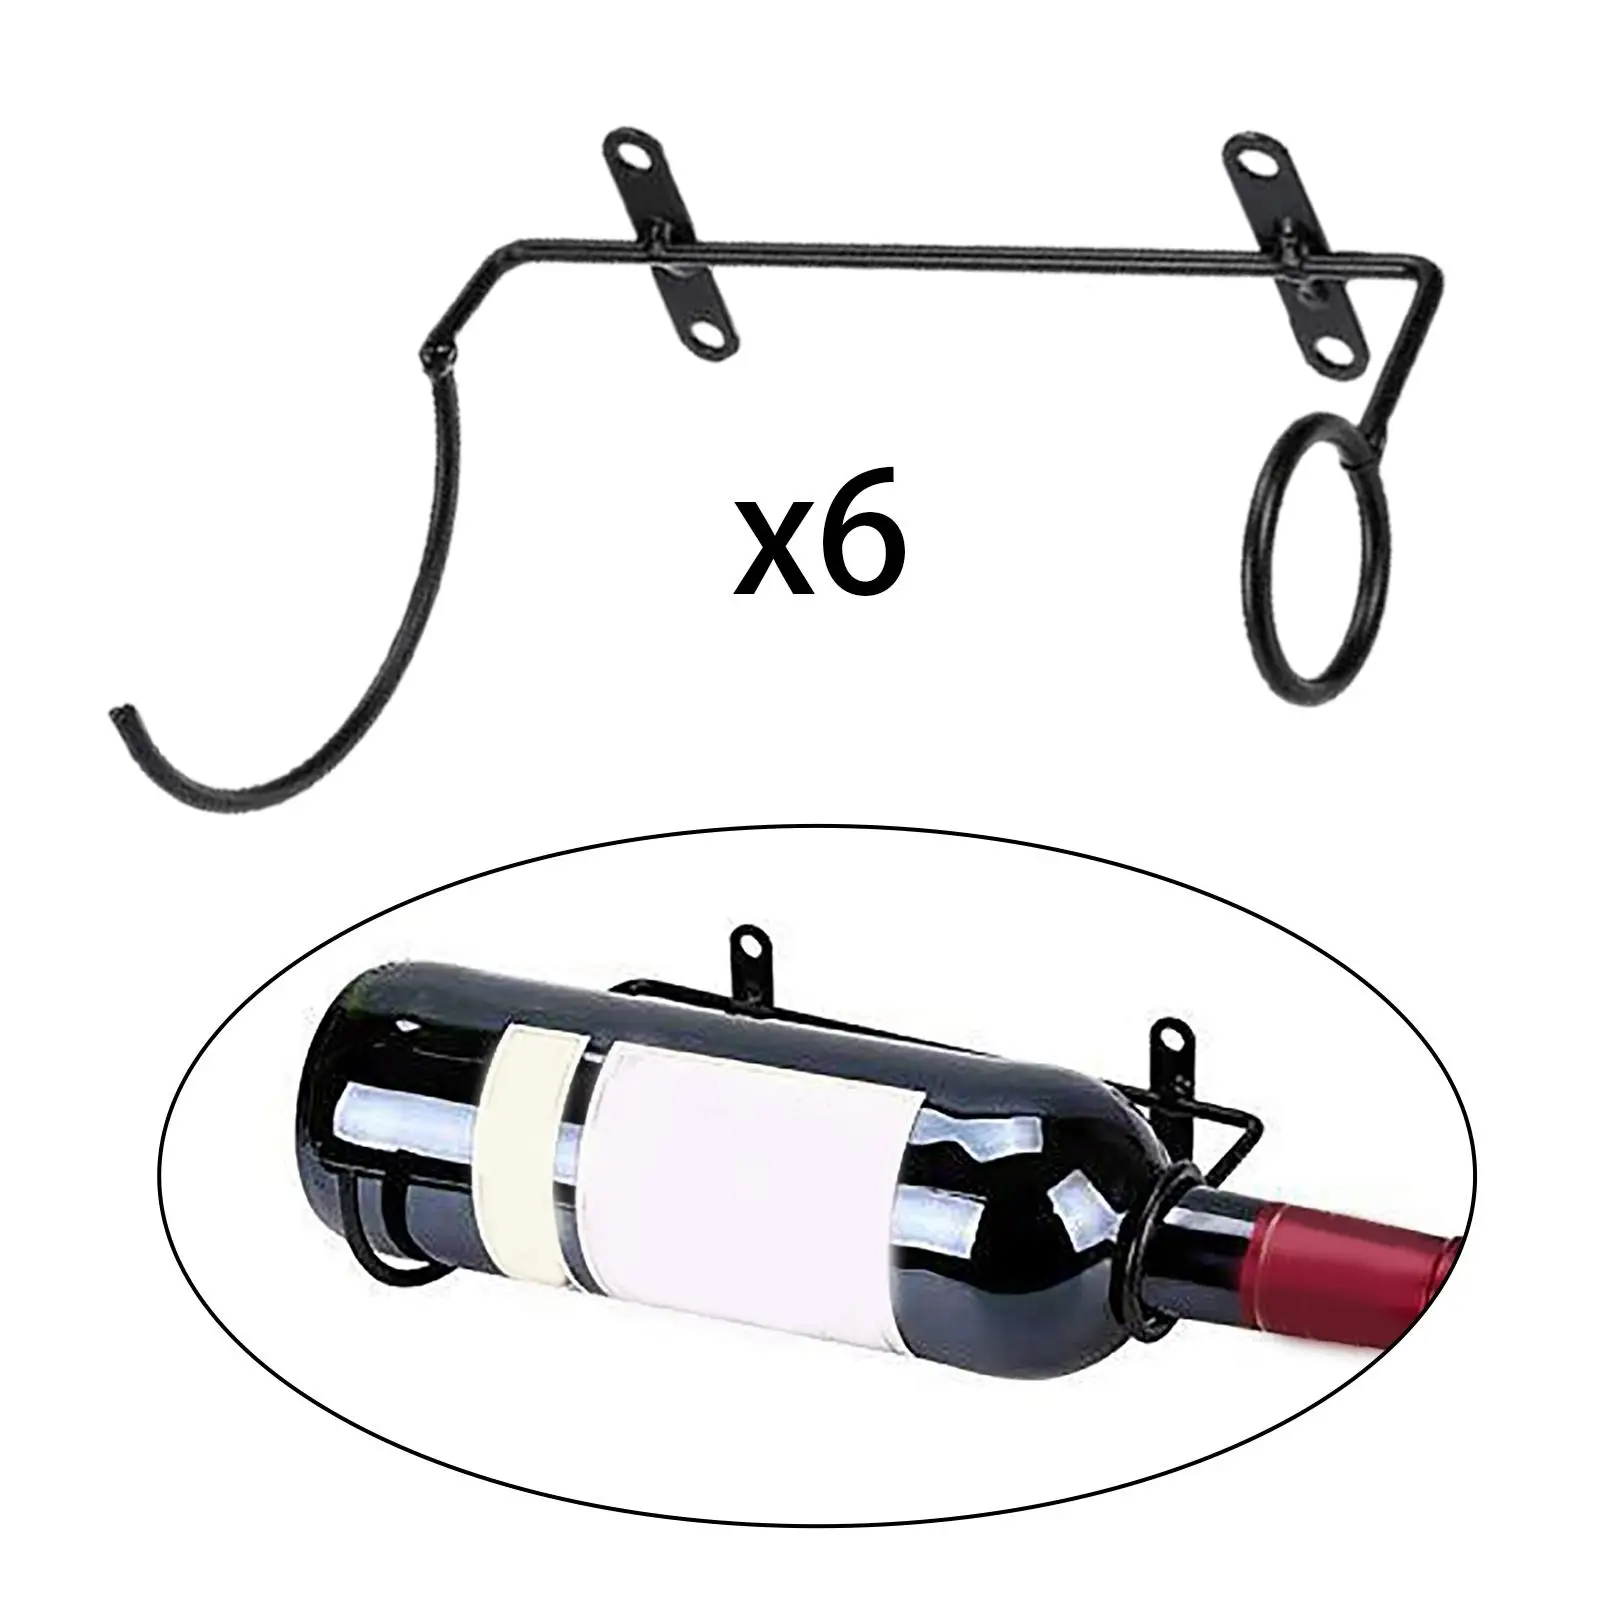 6 Pieces  Holder, Wall Mounted  Rack, Iron  Bottle Display Holder Rack for Storage Wall Decor